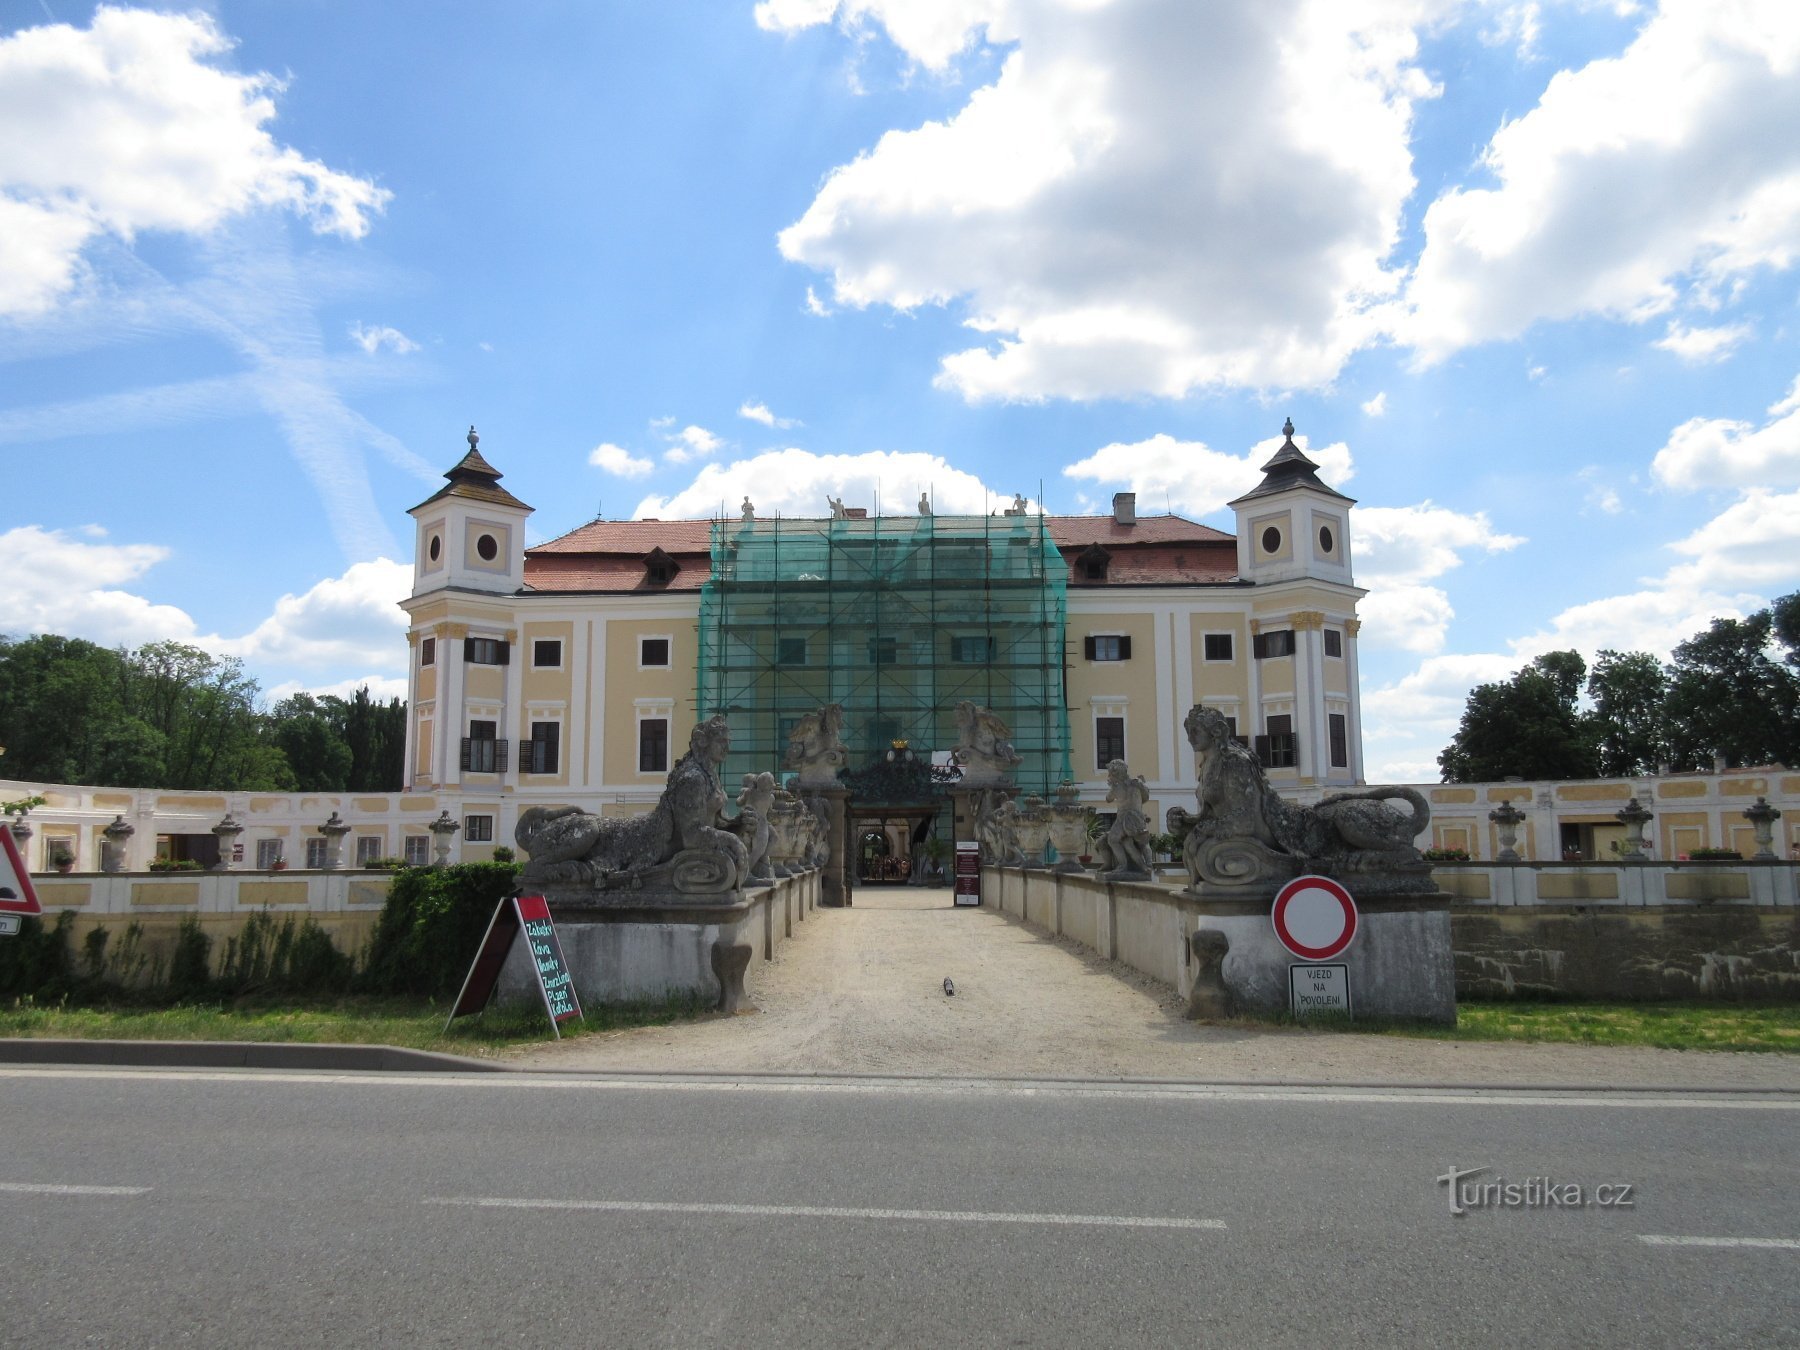 Milotice - state castle and its history